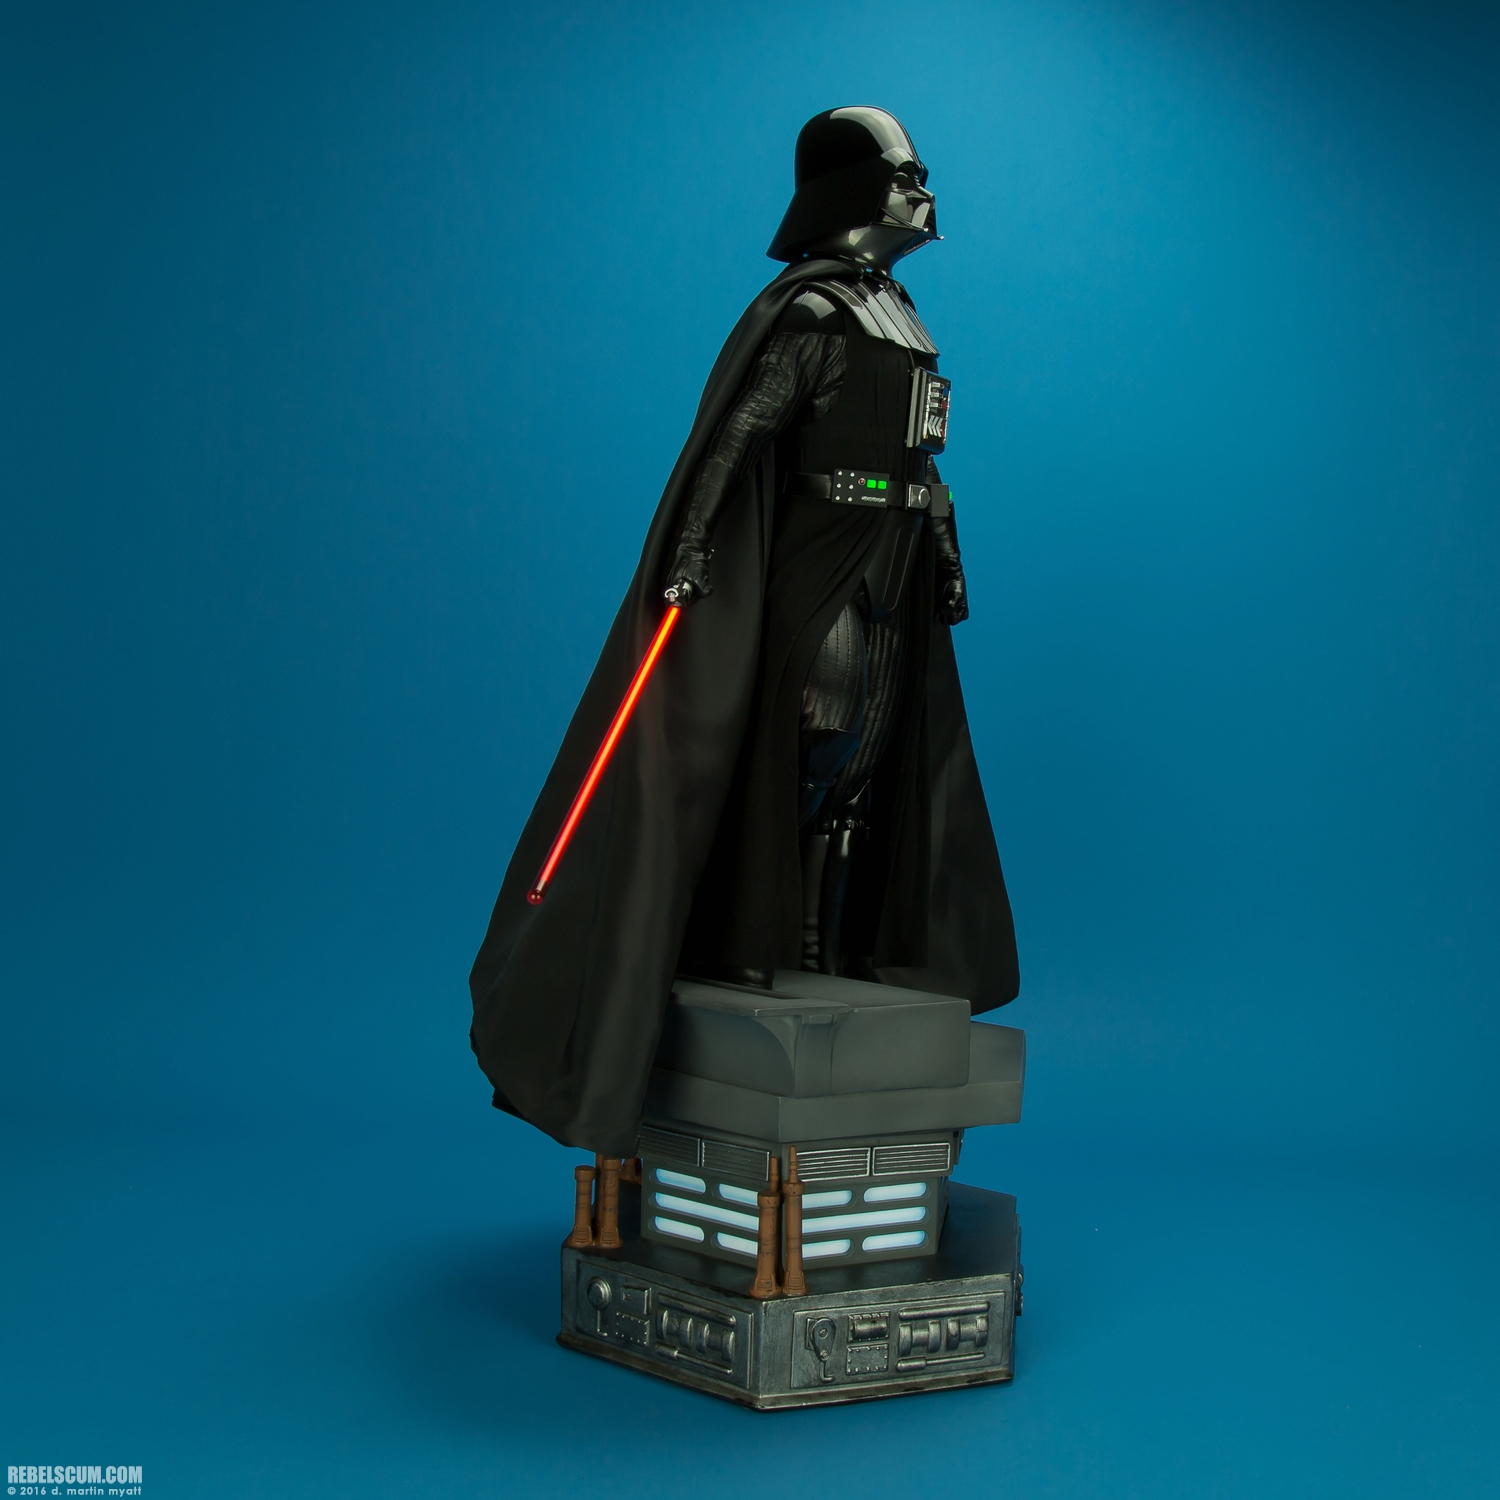 Darth-Vader-Lord-of-the-Sith-Premium-Format-Figure-Sideshow-002.jpg